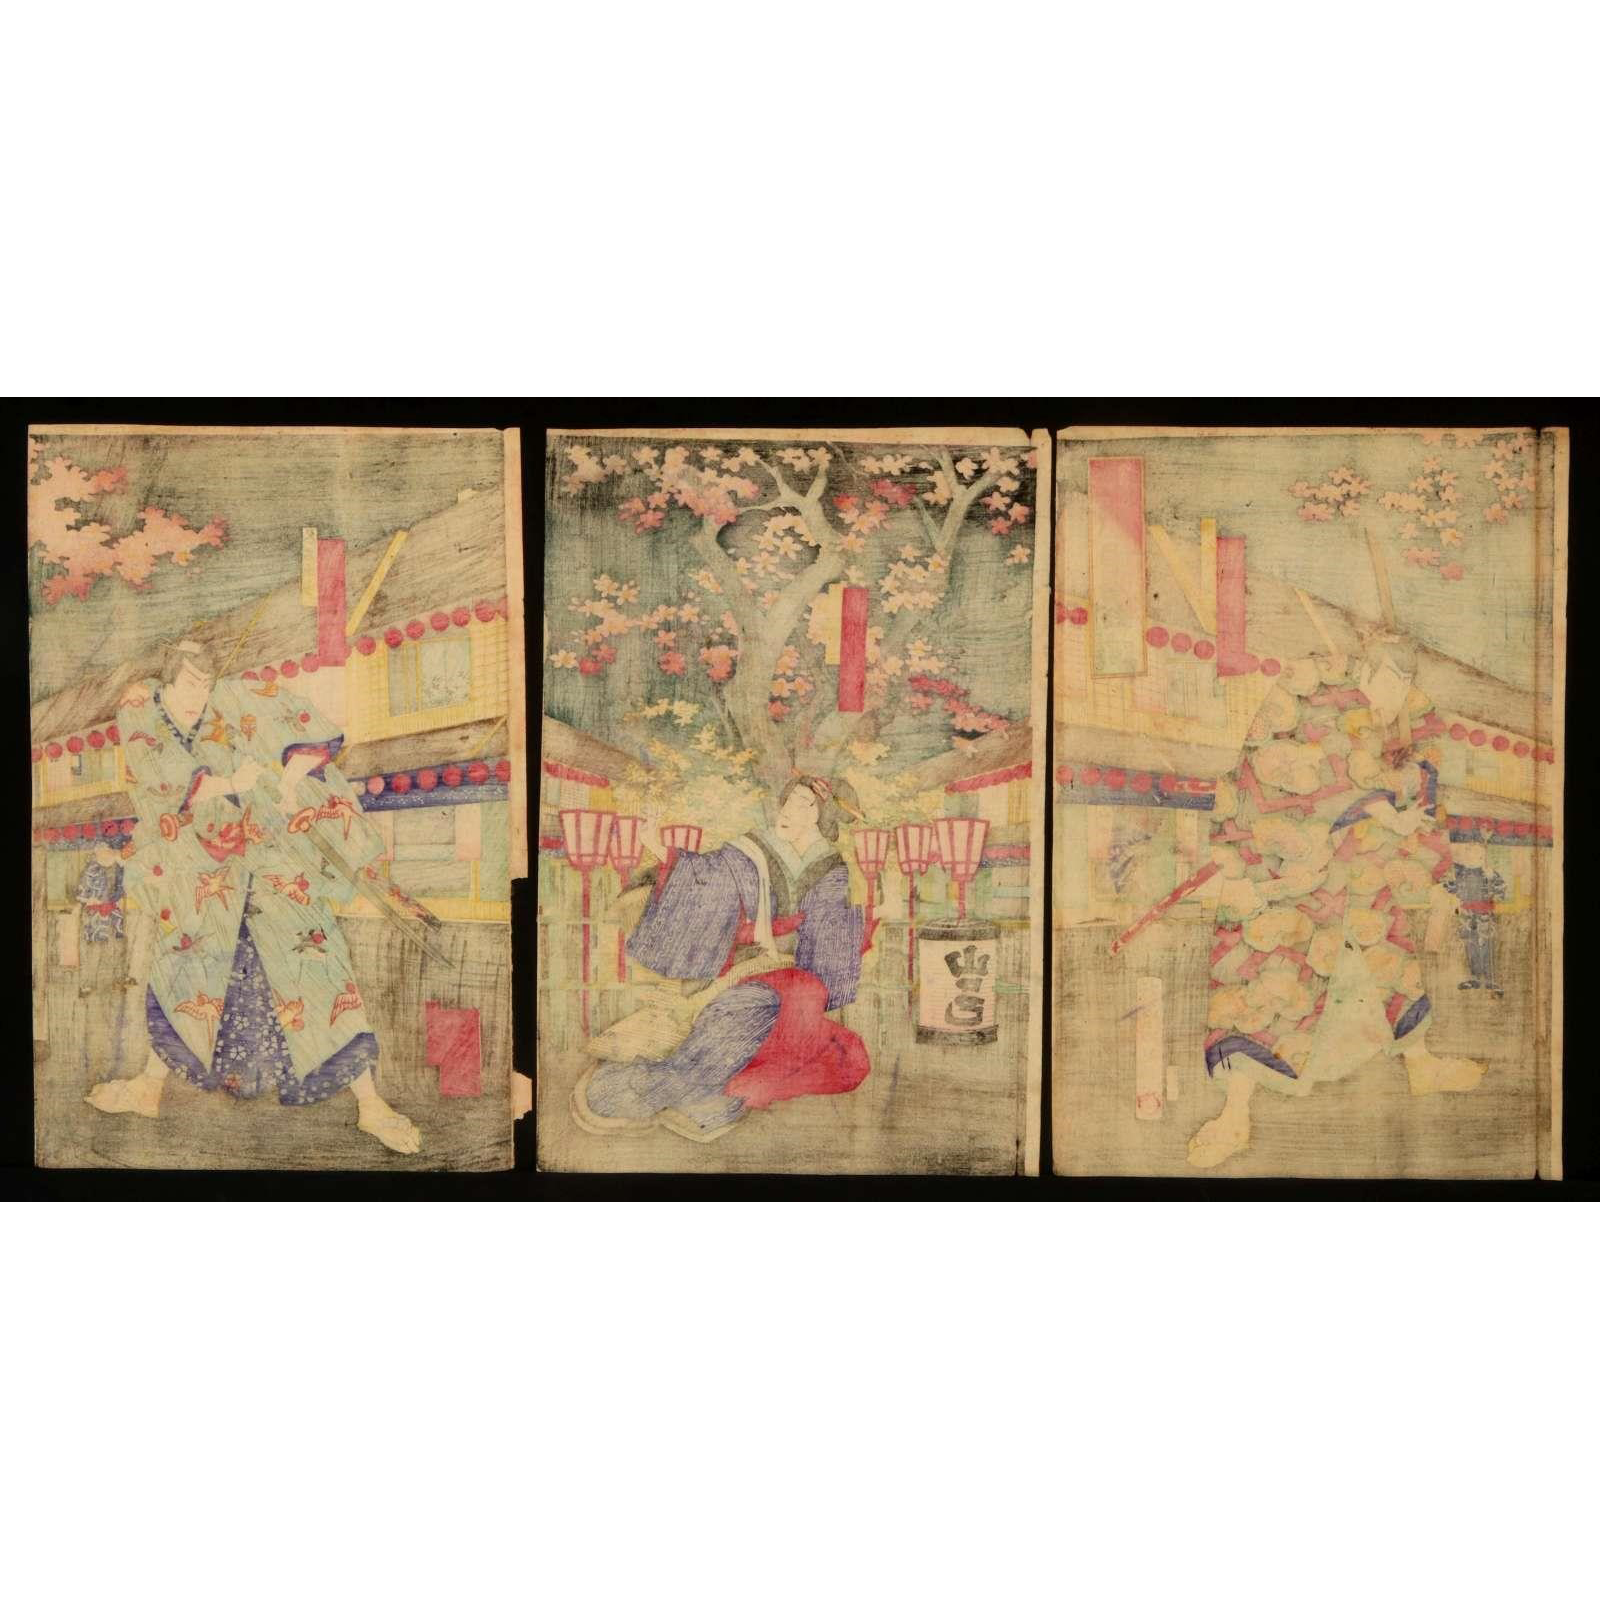 AW10-004: 19TH CENTURY JAPANESE WOODBLOCK TRIPTYCH PRINT